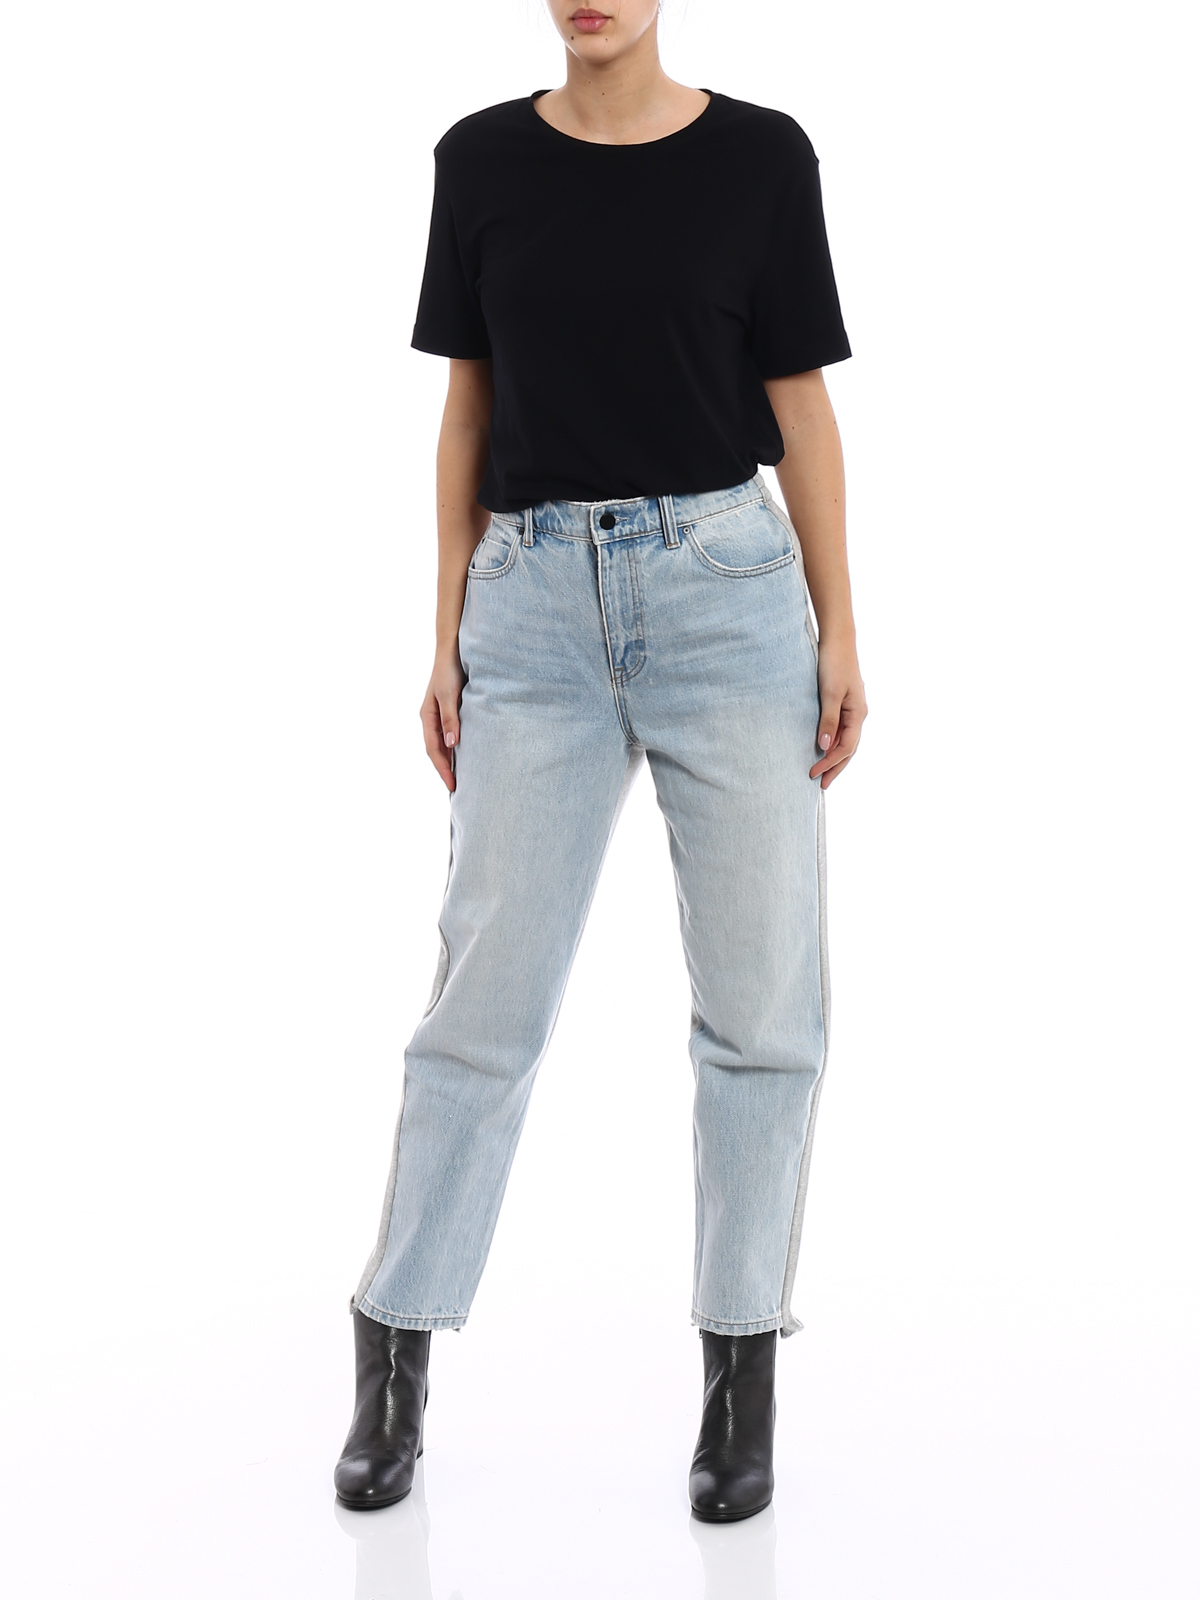 jeans pant combo offers online